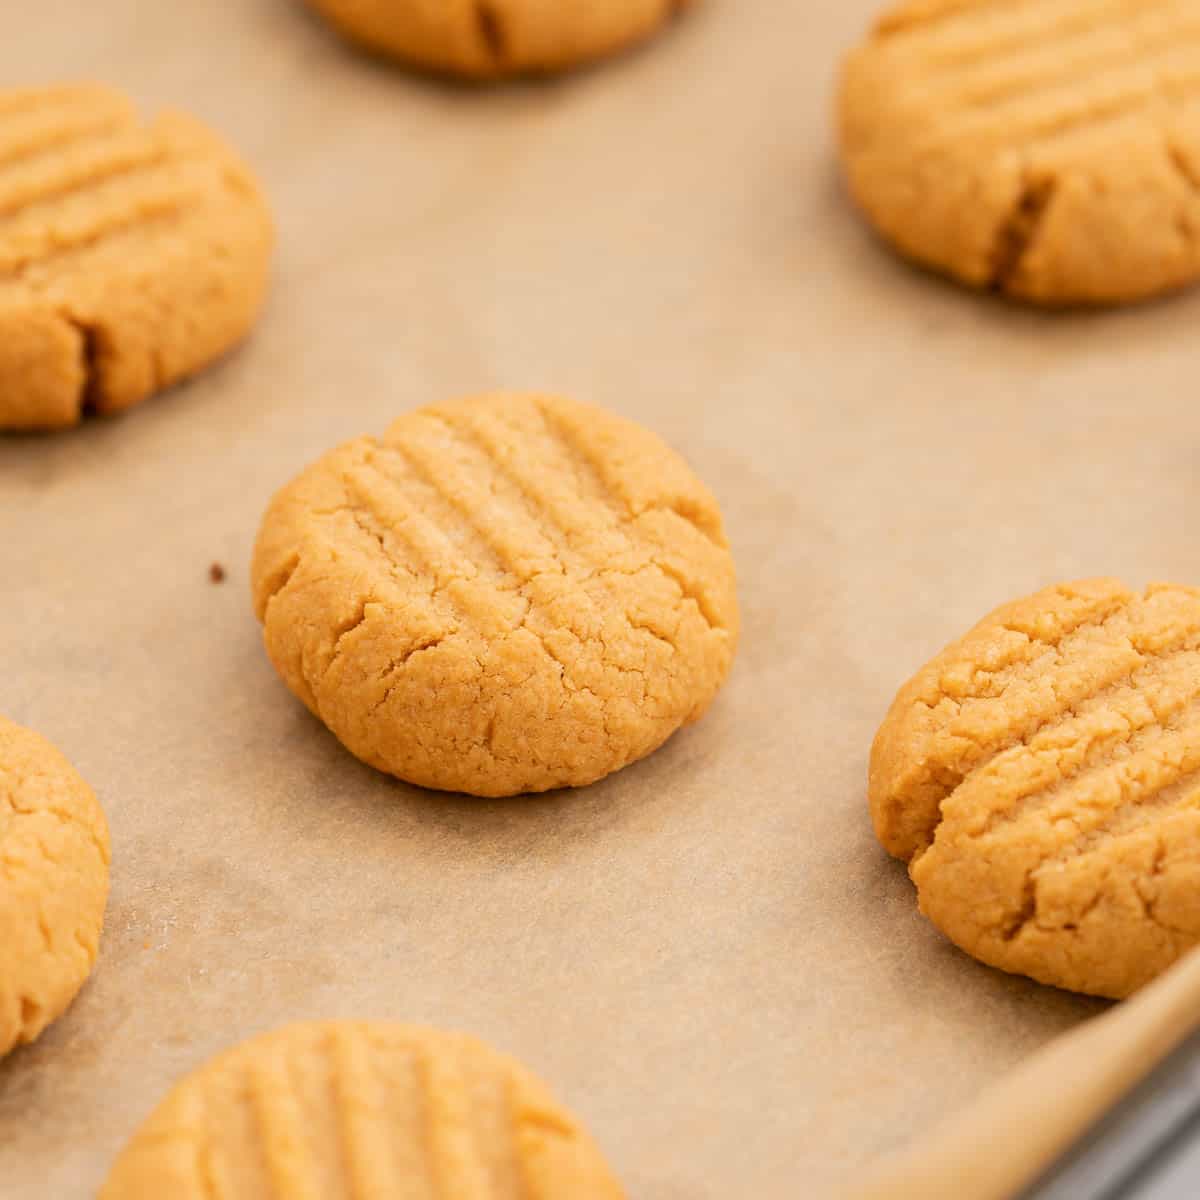 Baked cookies ready to come out of the oven on a baking paper lined tray.